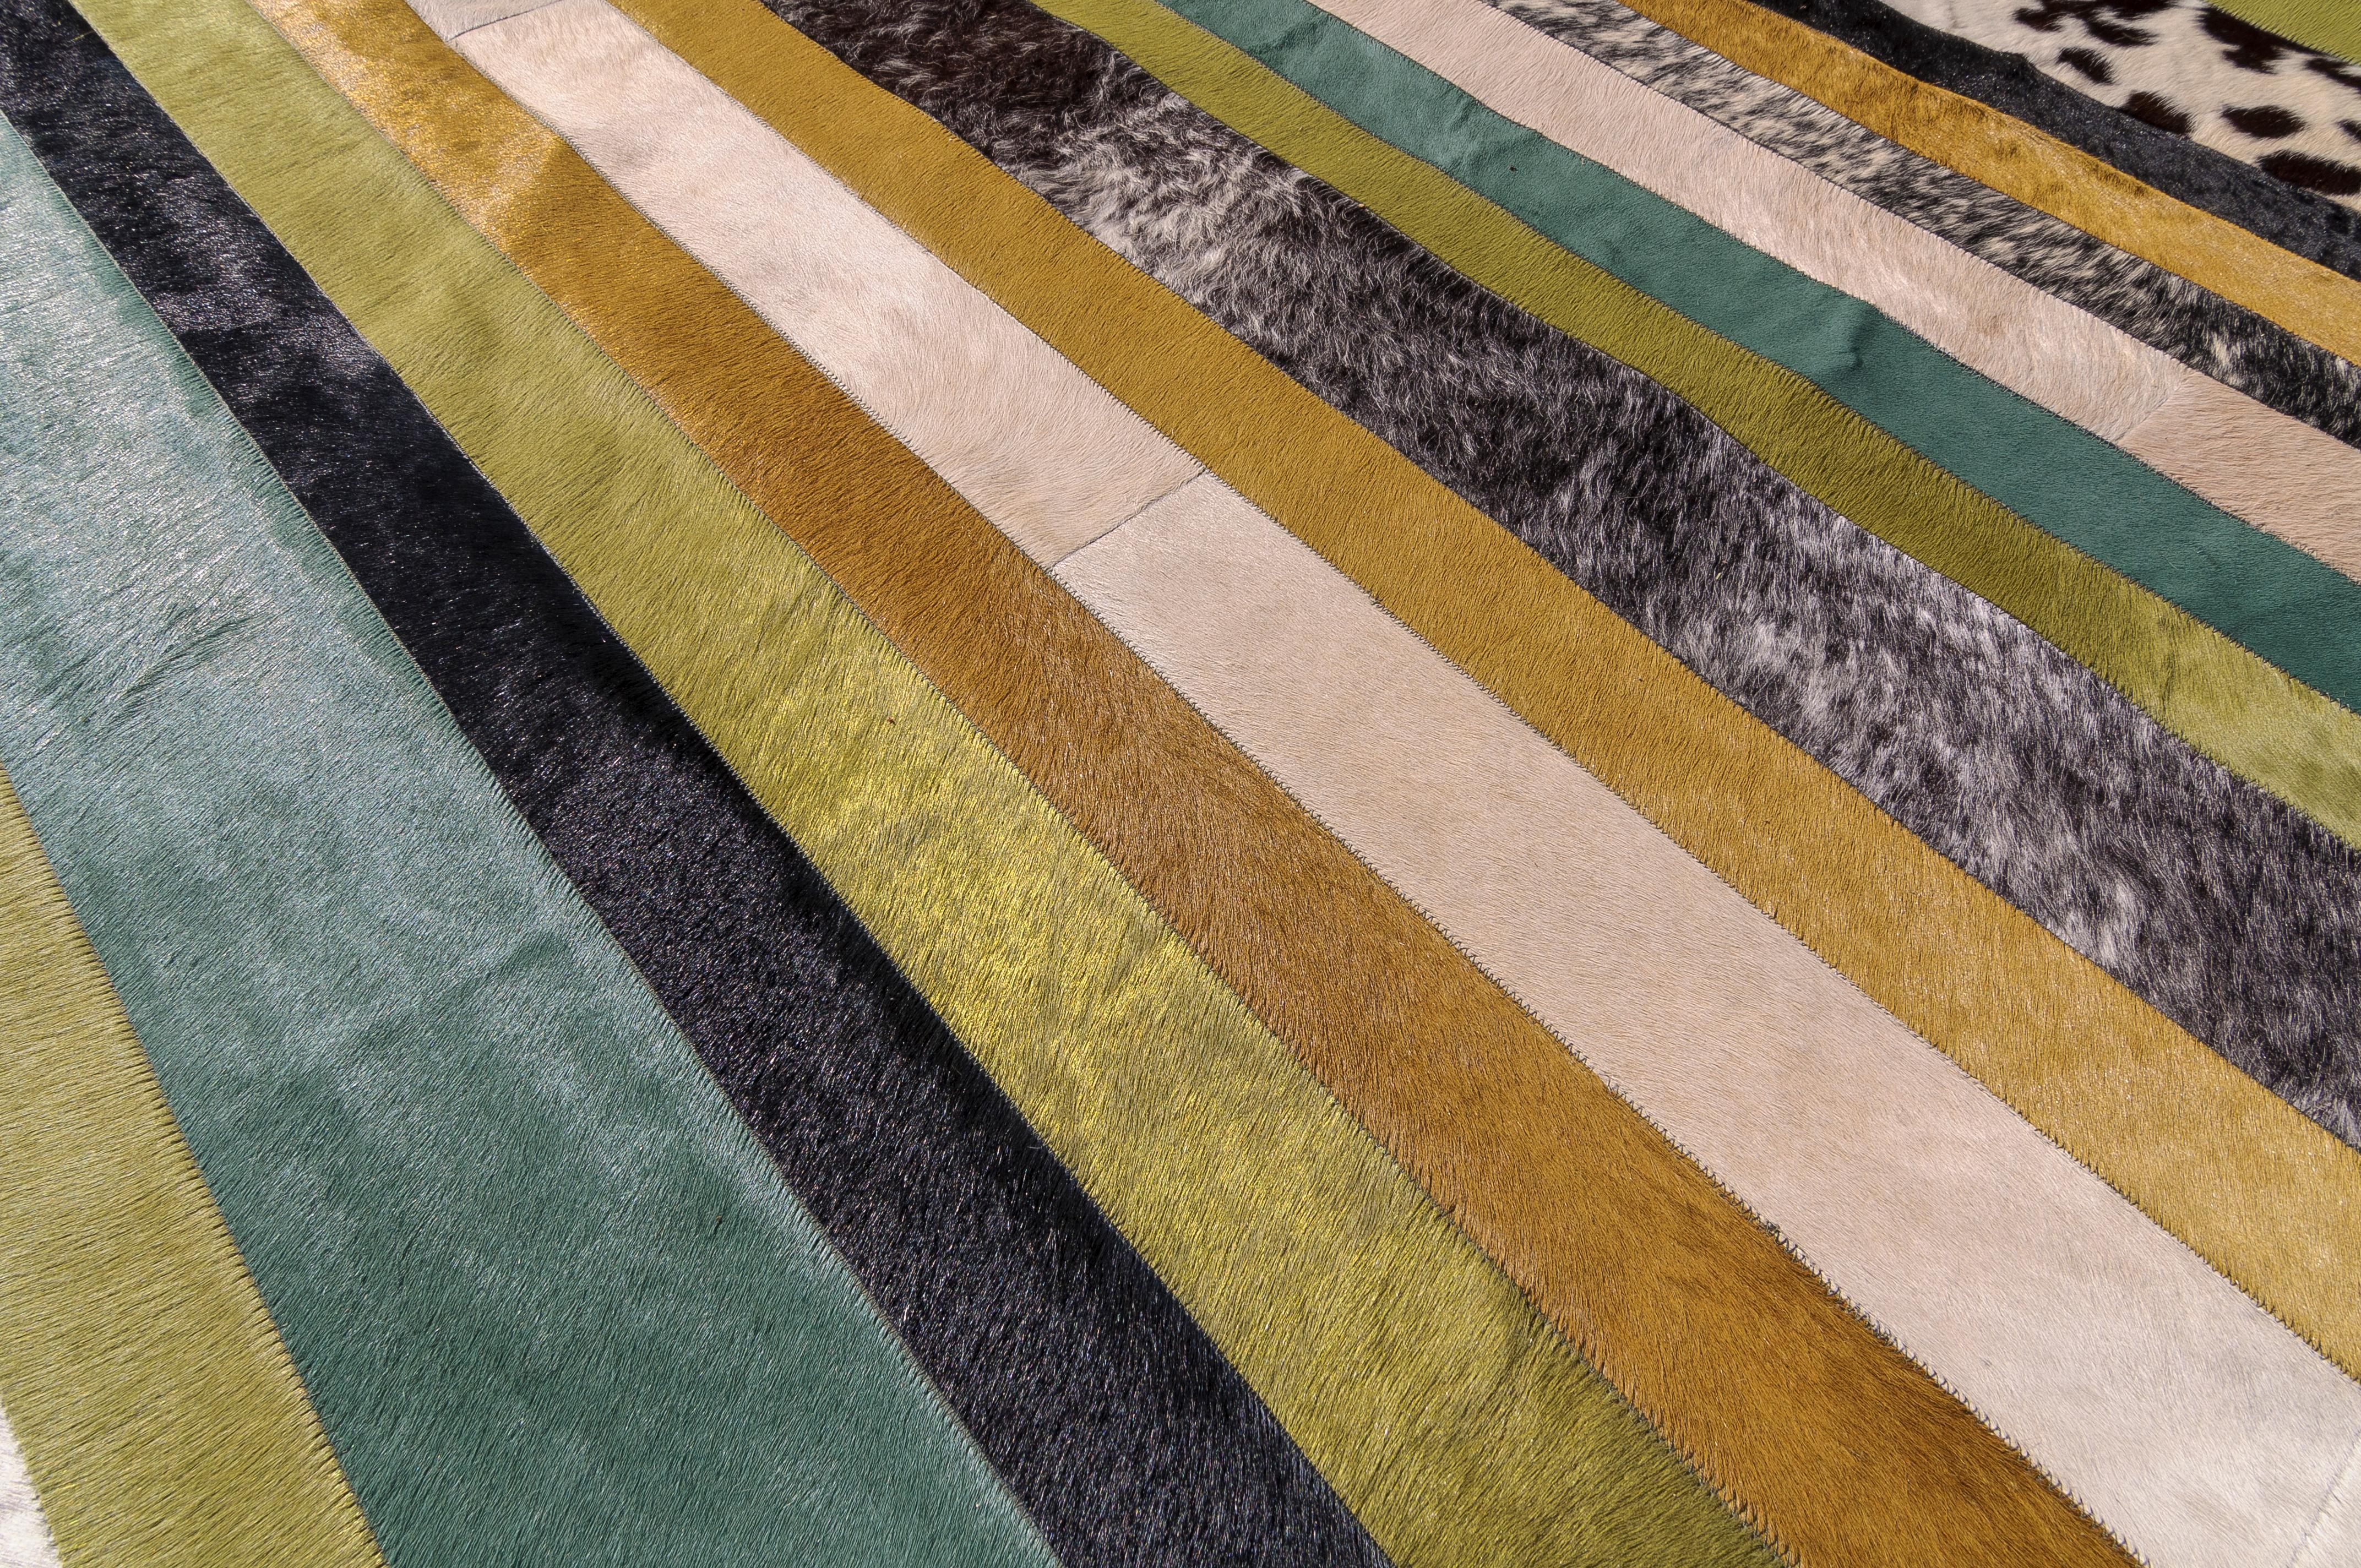 Machine-Made Green Ochre and White Stripes Nueva Raya Customizable Cowhide Area Rug XX-Large For Sale